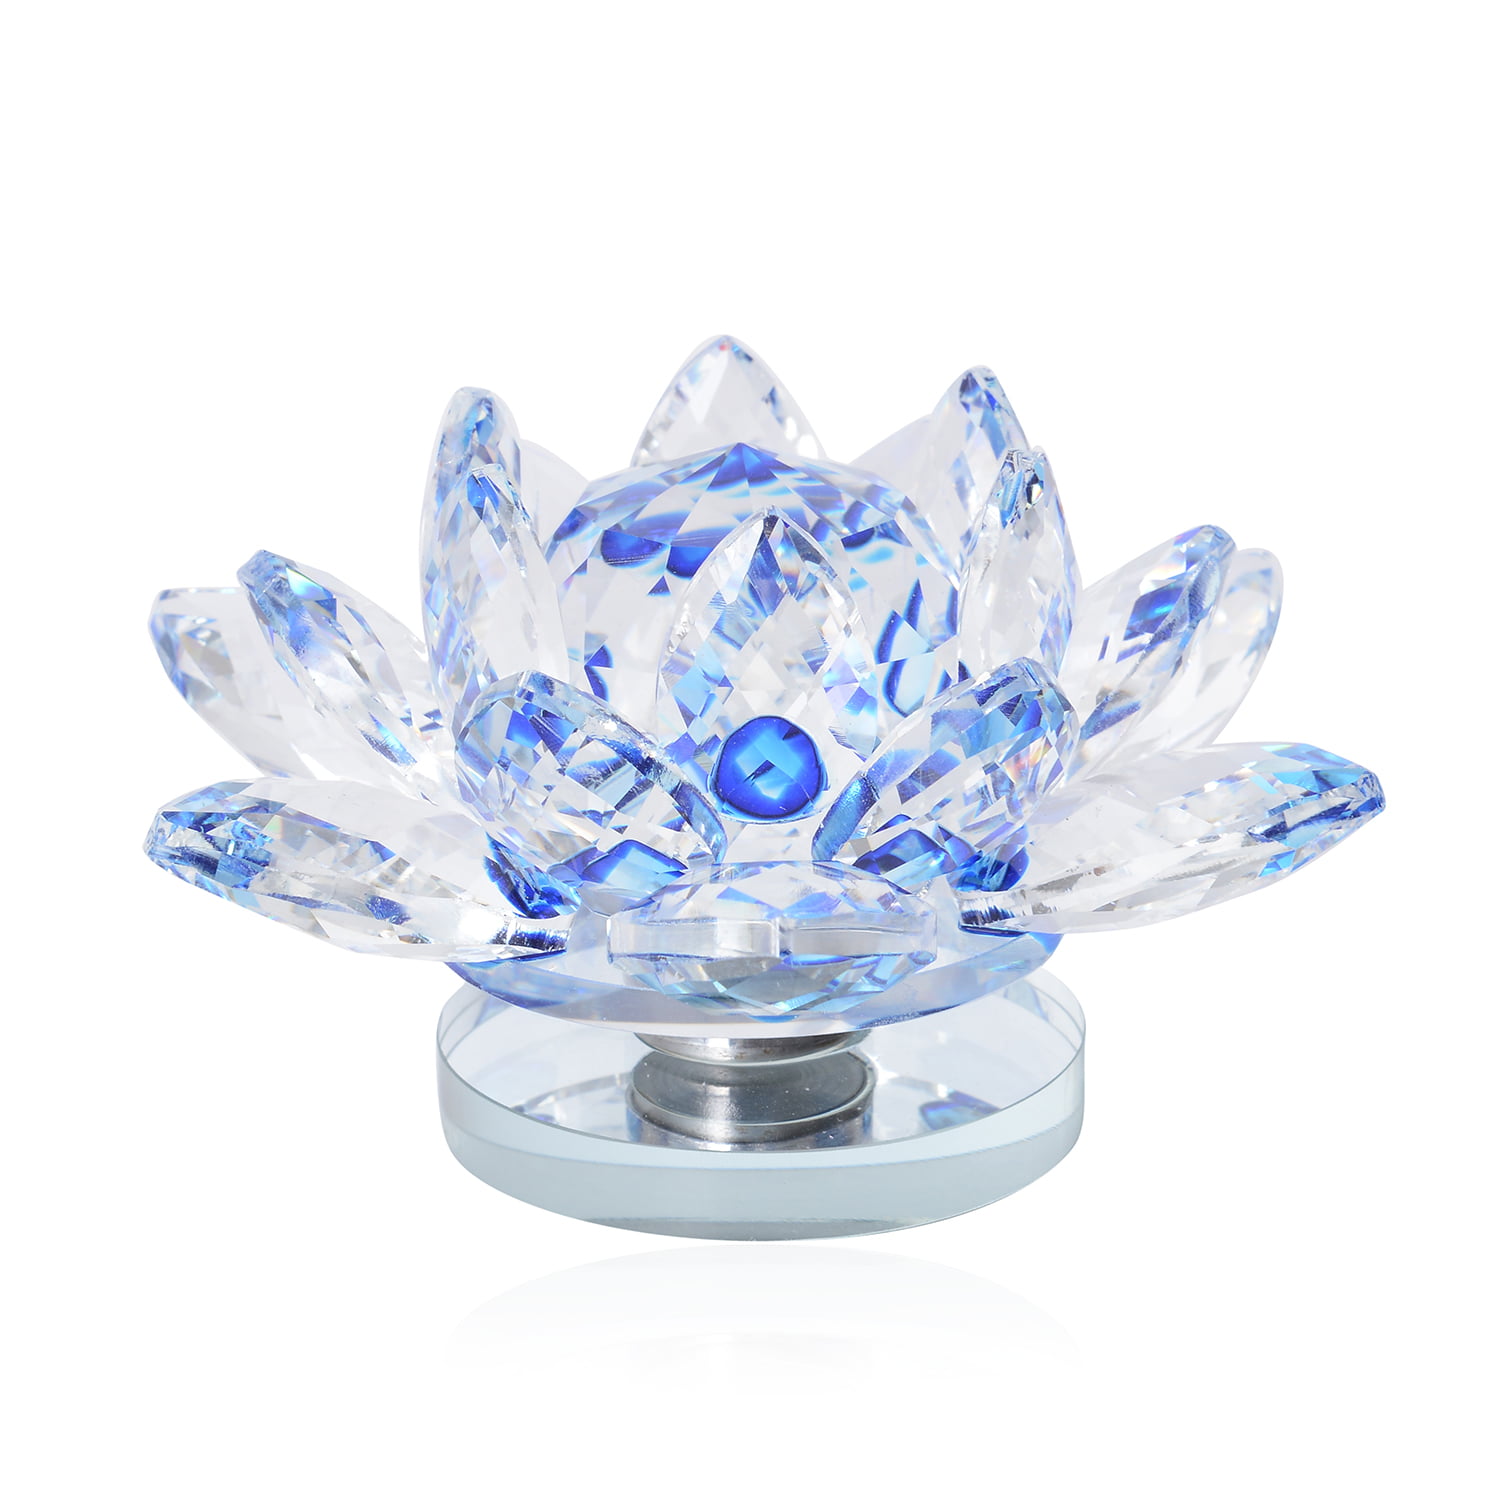 OwnMy Crystal Lotus Flower Jewelry Dish Home Decoration Desk Ornaments Paperweight Jewelry Holder Tray Decor Dish Plate 